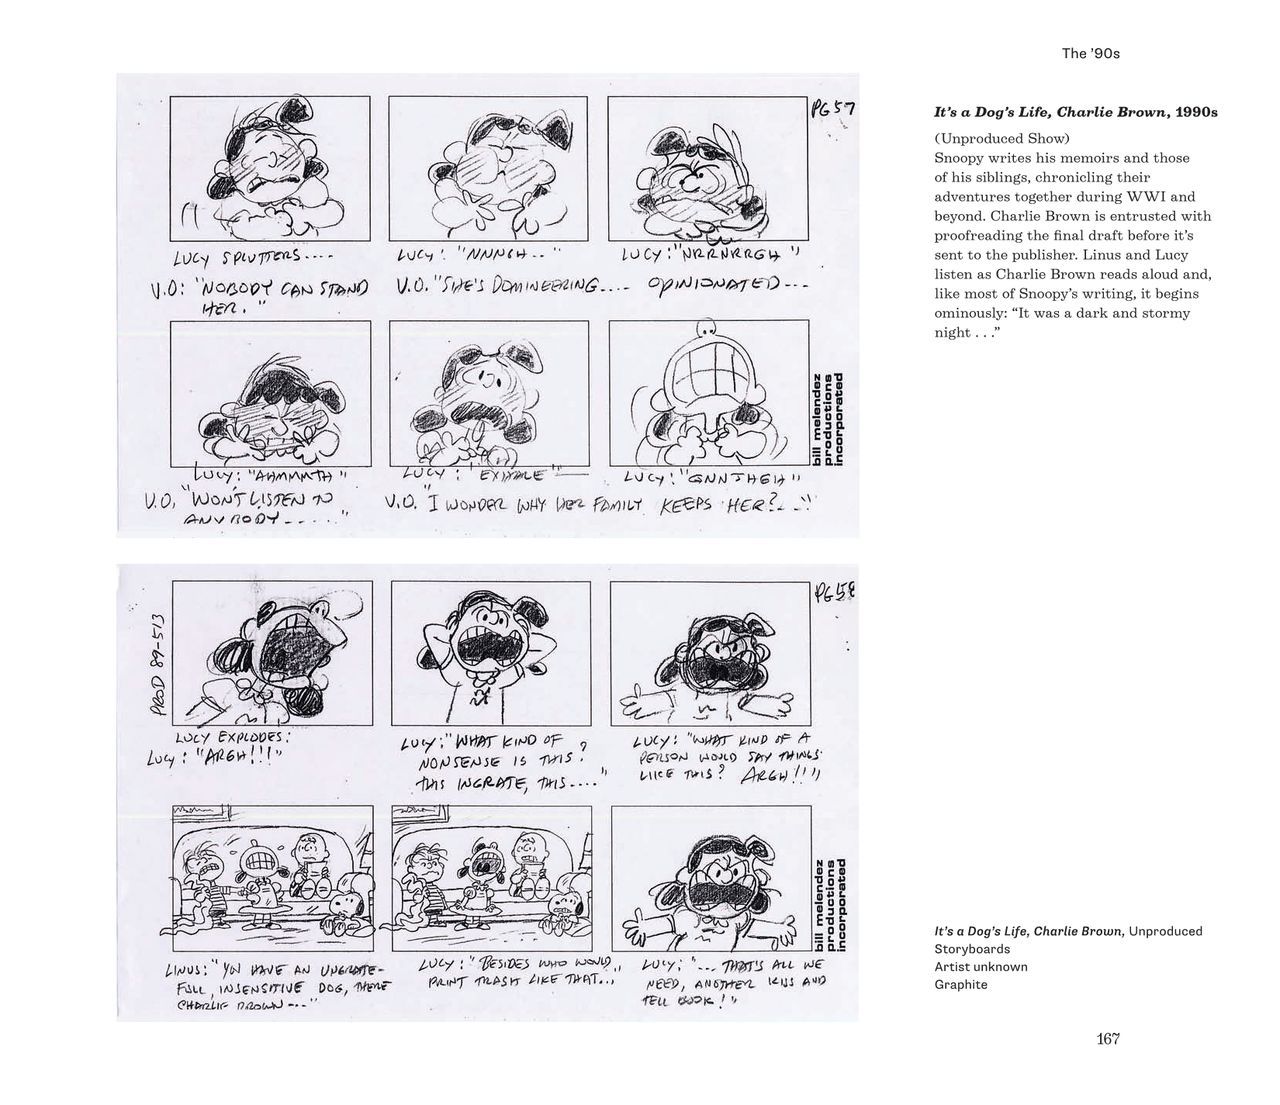 The Art and Making of Peanuts Animation 171